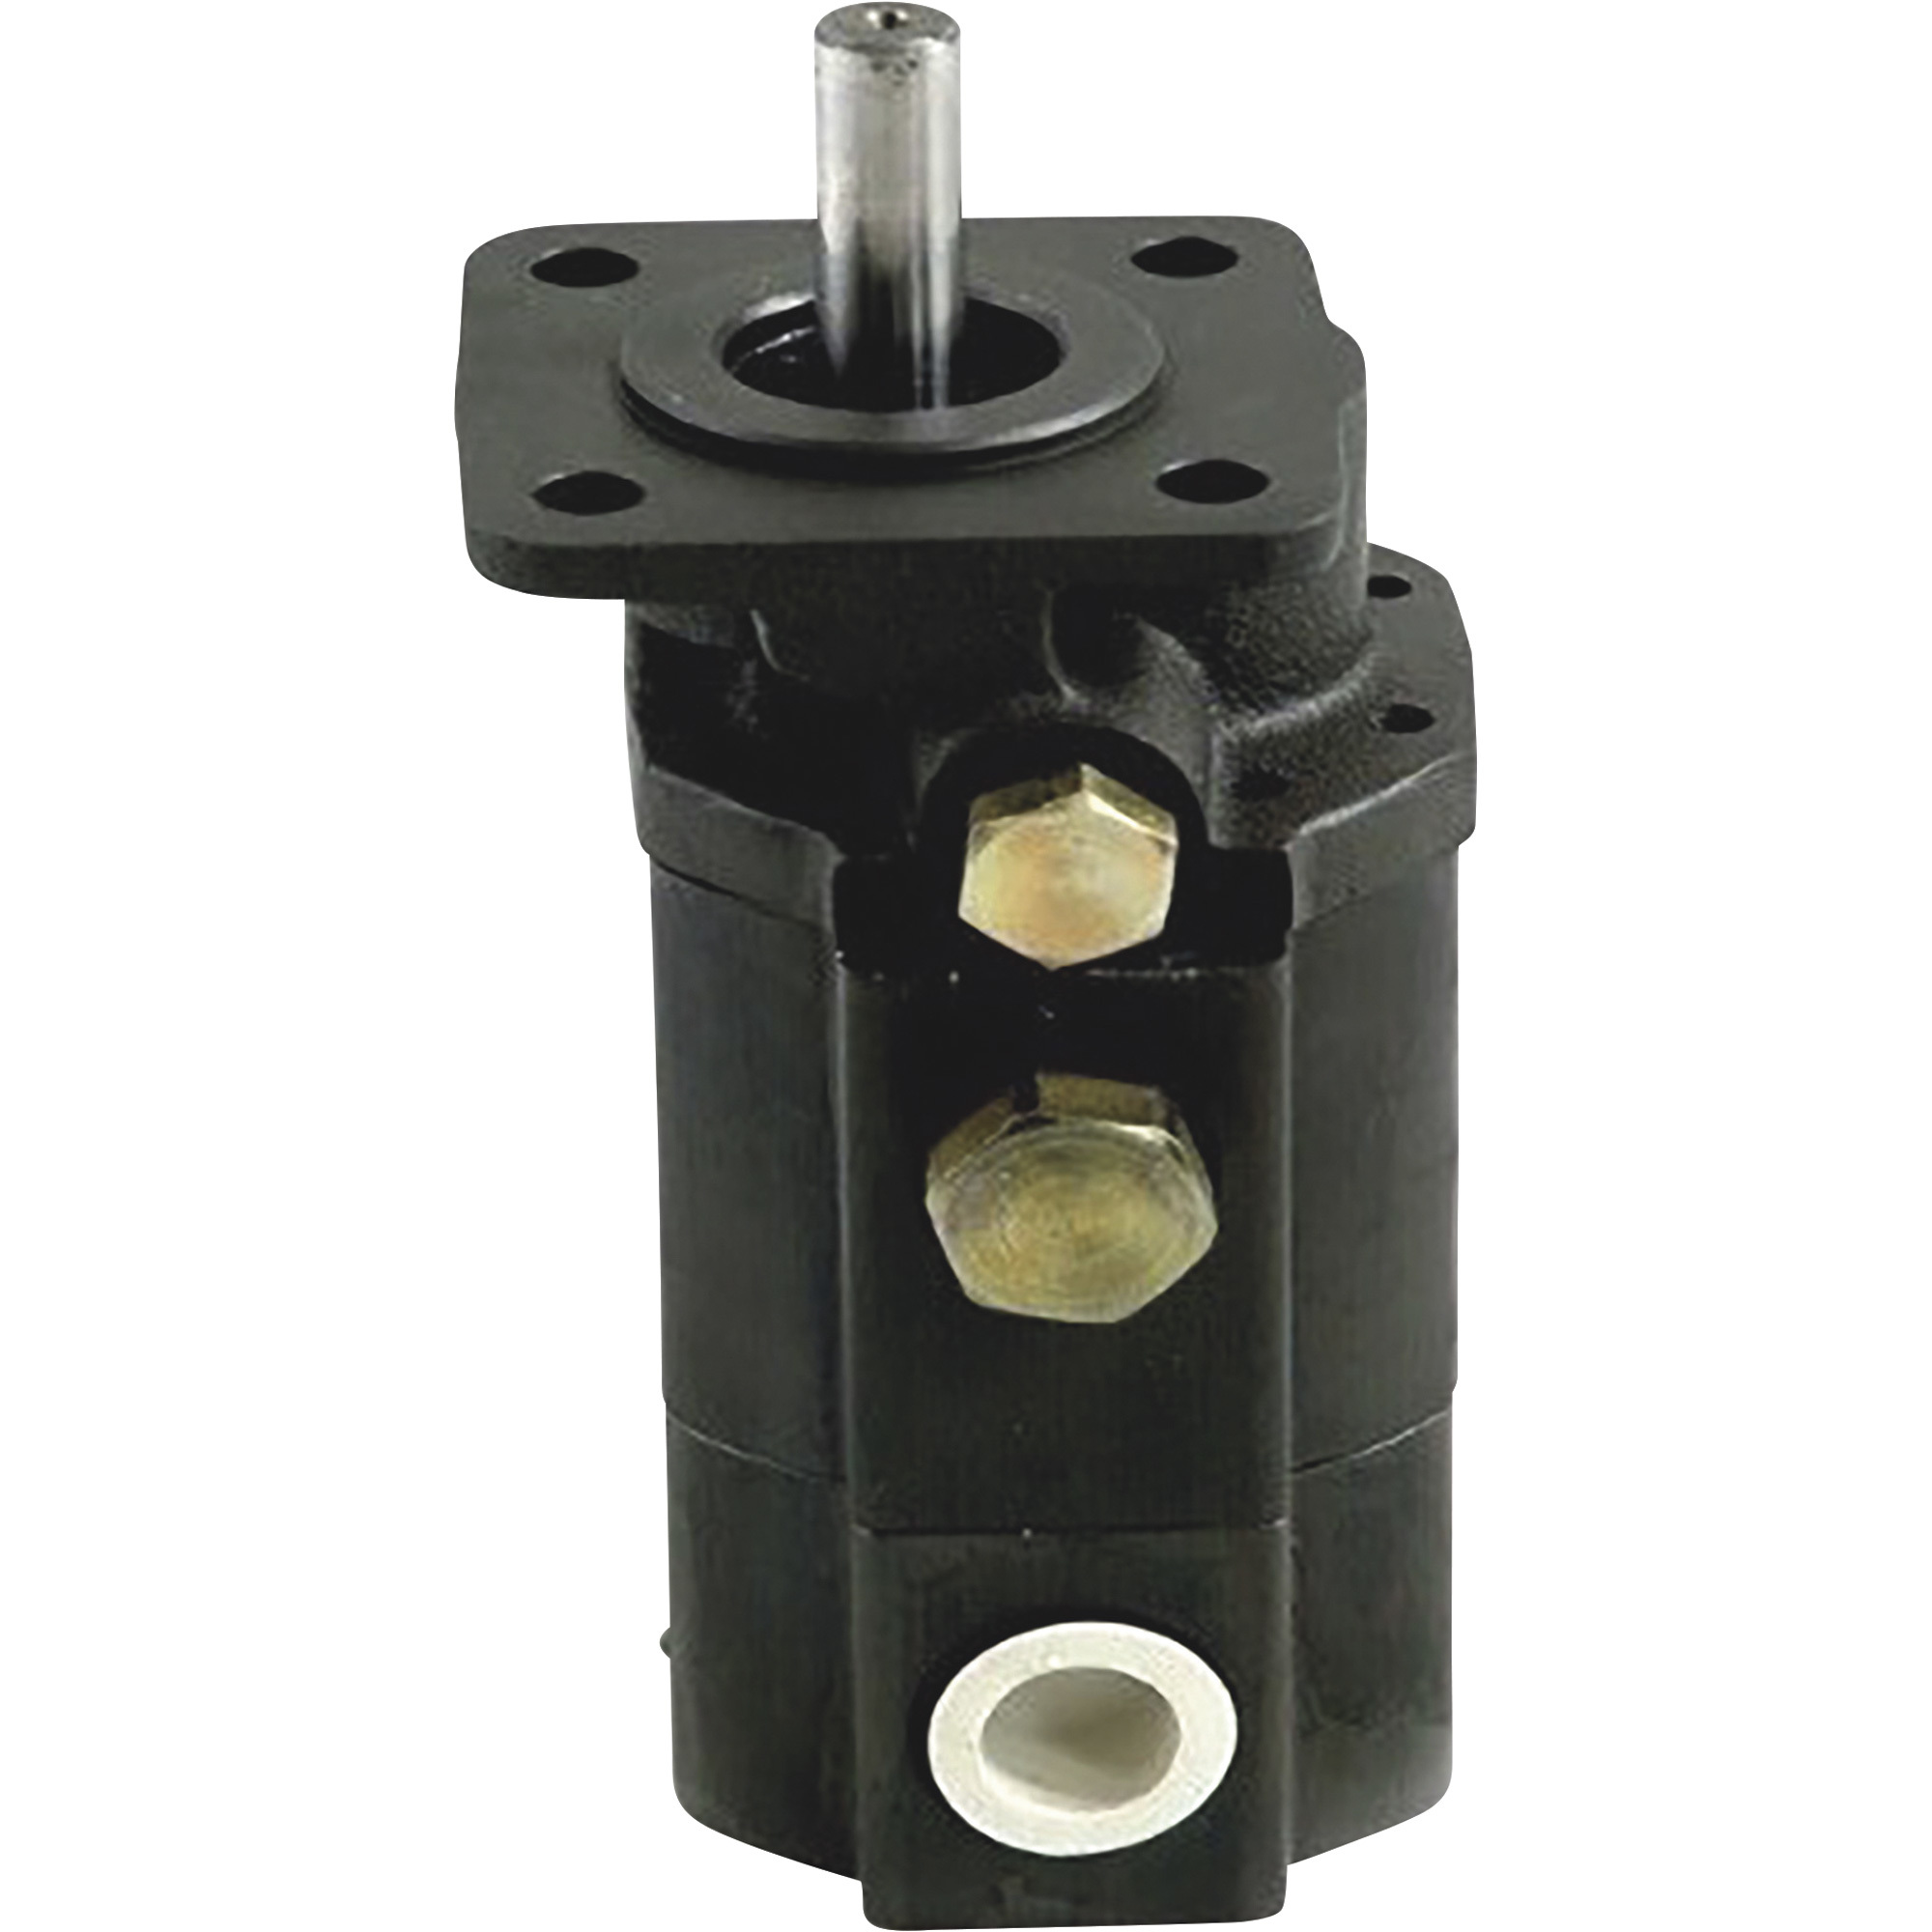 NorTrac Cast Iron/Aluminum Two-Stage High/Low Hydraulic Gear Pump, 13 GPM, 1/2Inch Diameter Shaft, Model CBNA-10.9/2.1